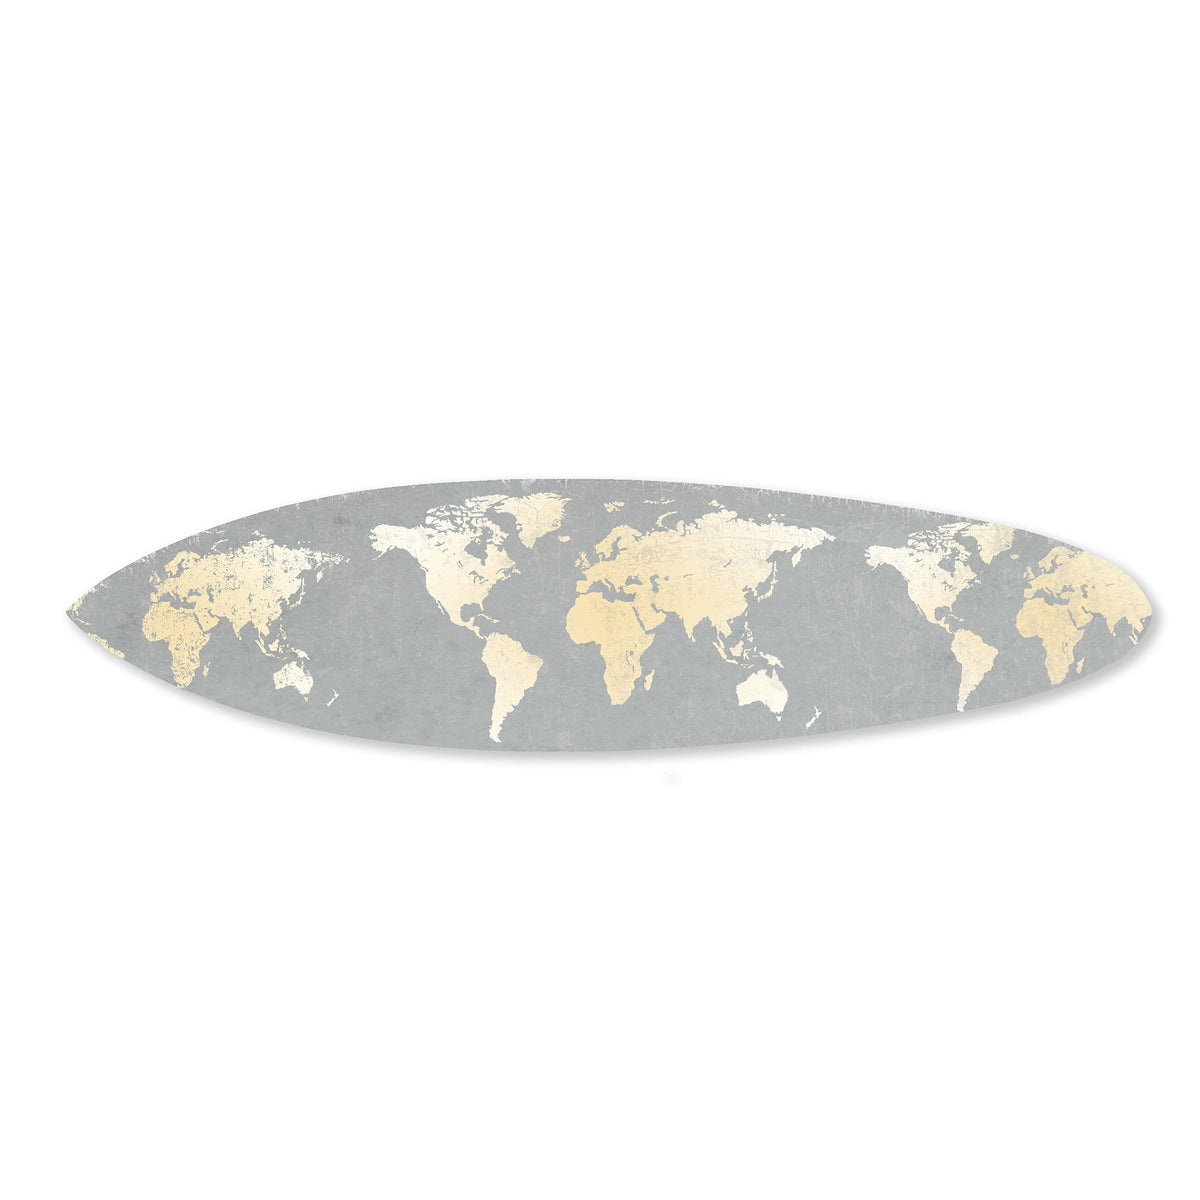 Wooden Surfboard Wall Art with World Map Print, Gray and White - BM220210